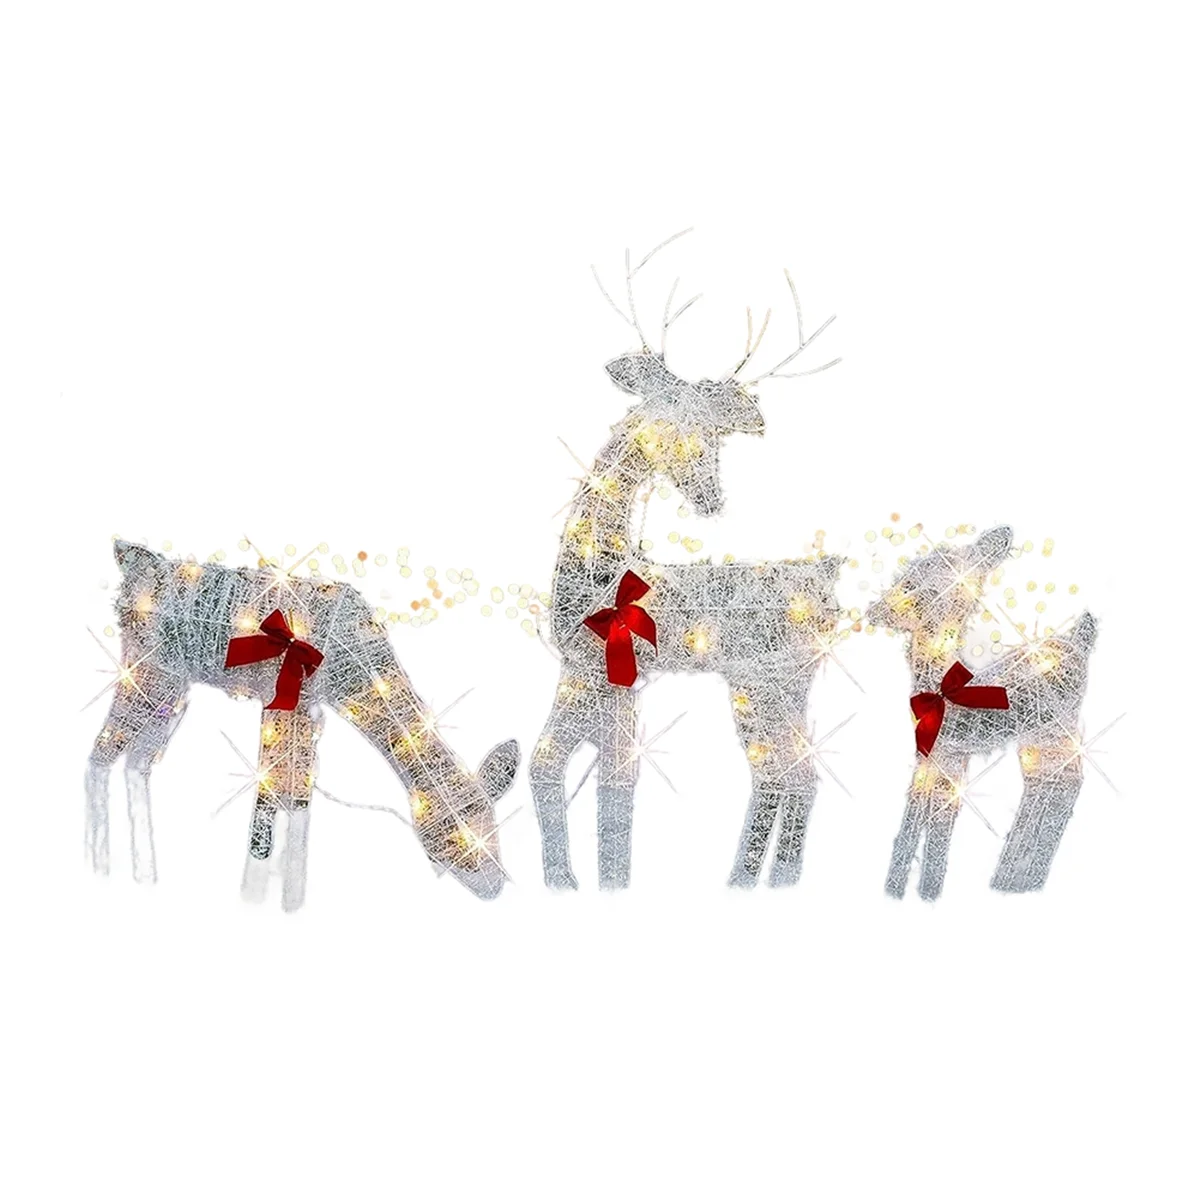 

Set of 3 Lighted Christmas 2D Reindeers Outdoor Decorations, Pre-Lit Light Up Xmas Rudolph & Santa Sleigh with Lights